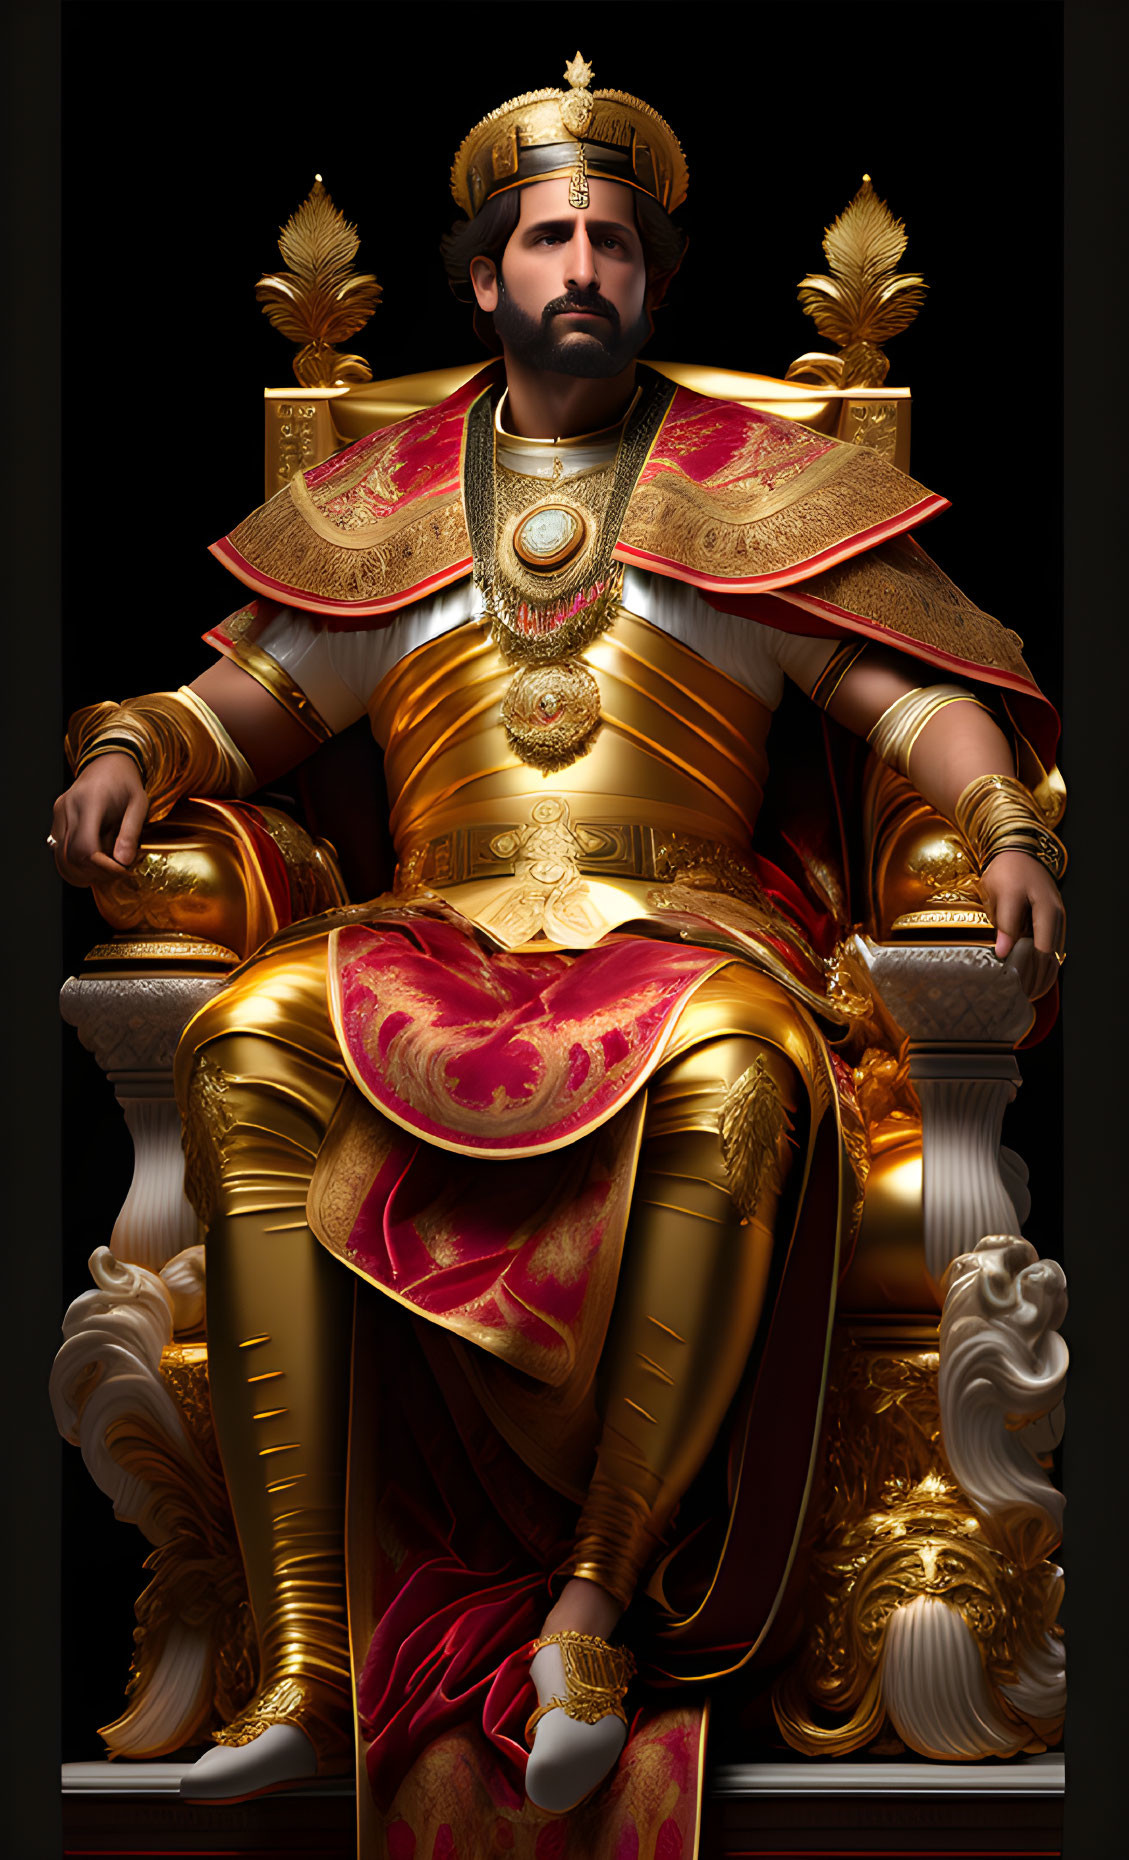 Regally dressed figure on golden throne in red and gold attire